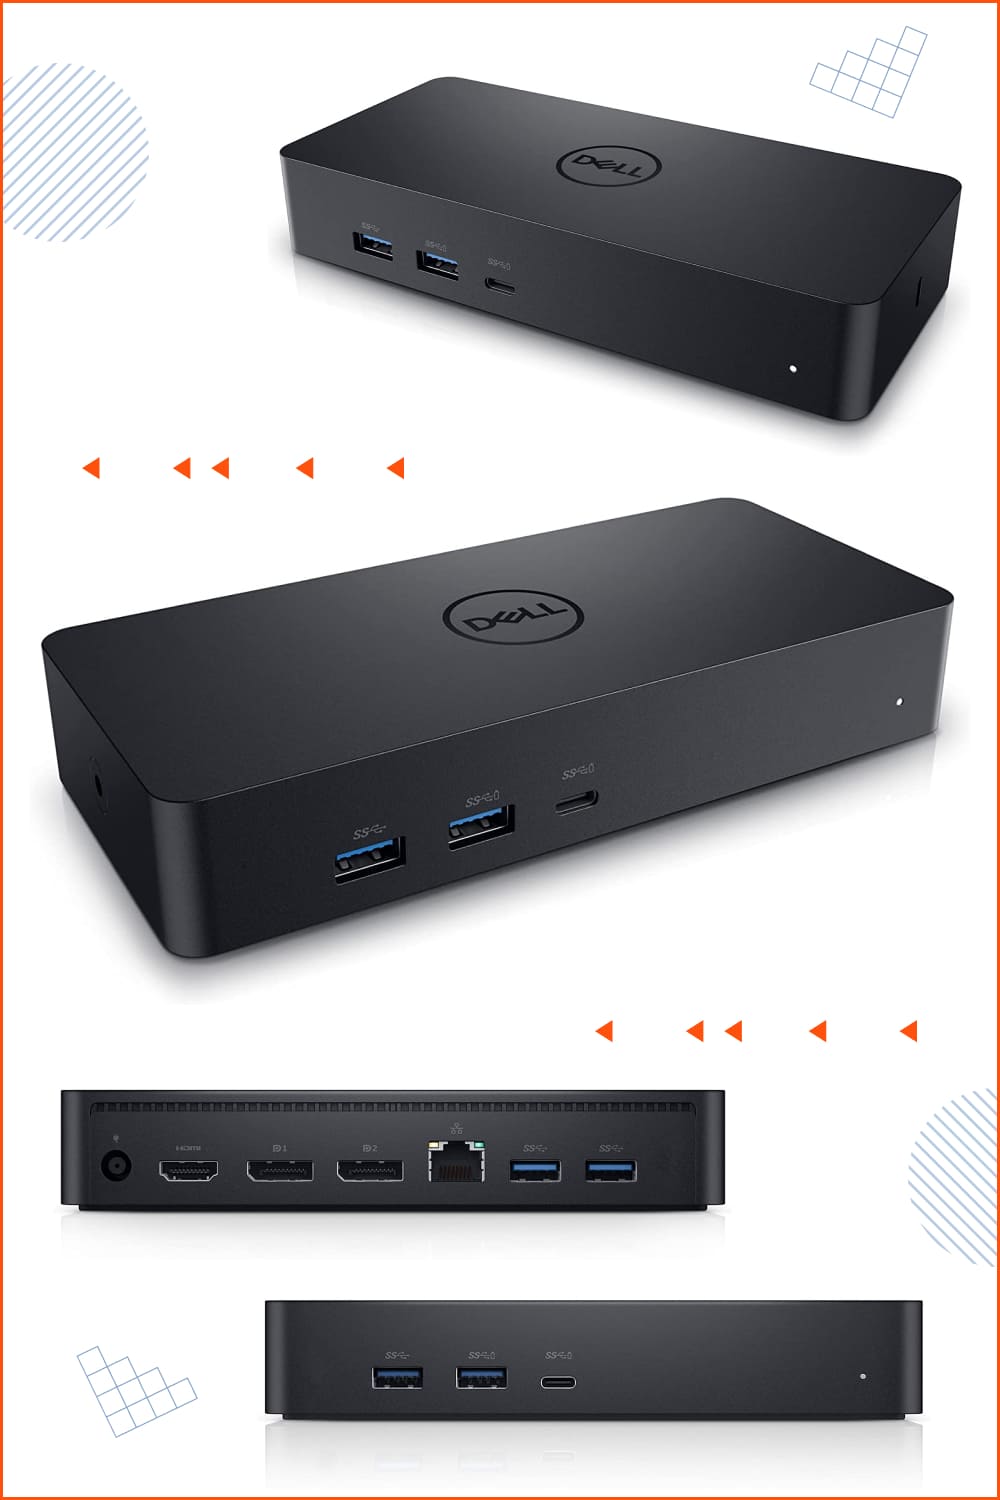 Black universal doc station from Dell.